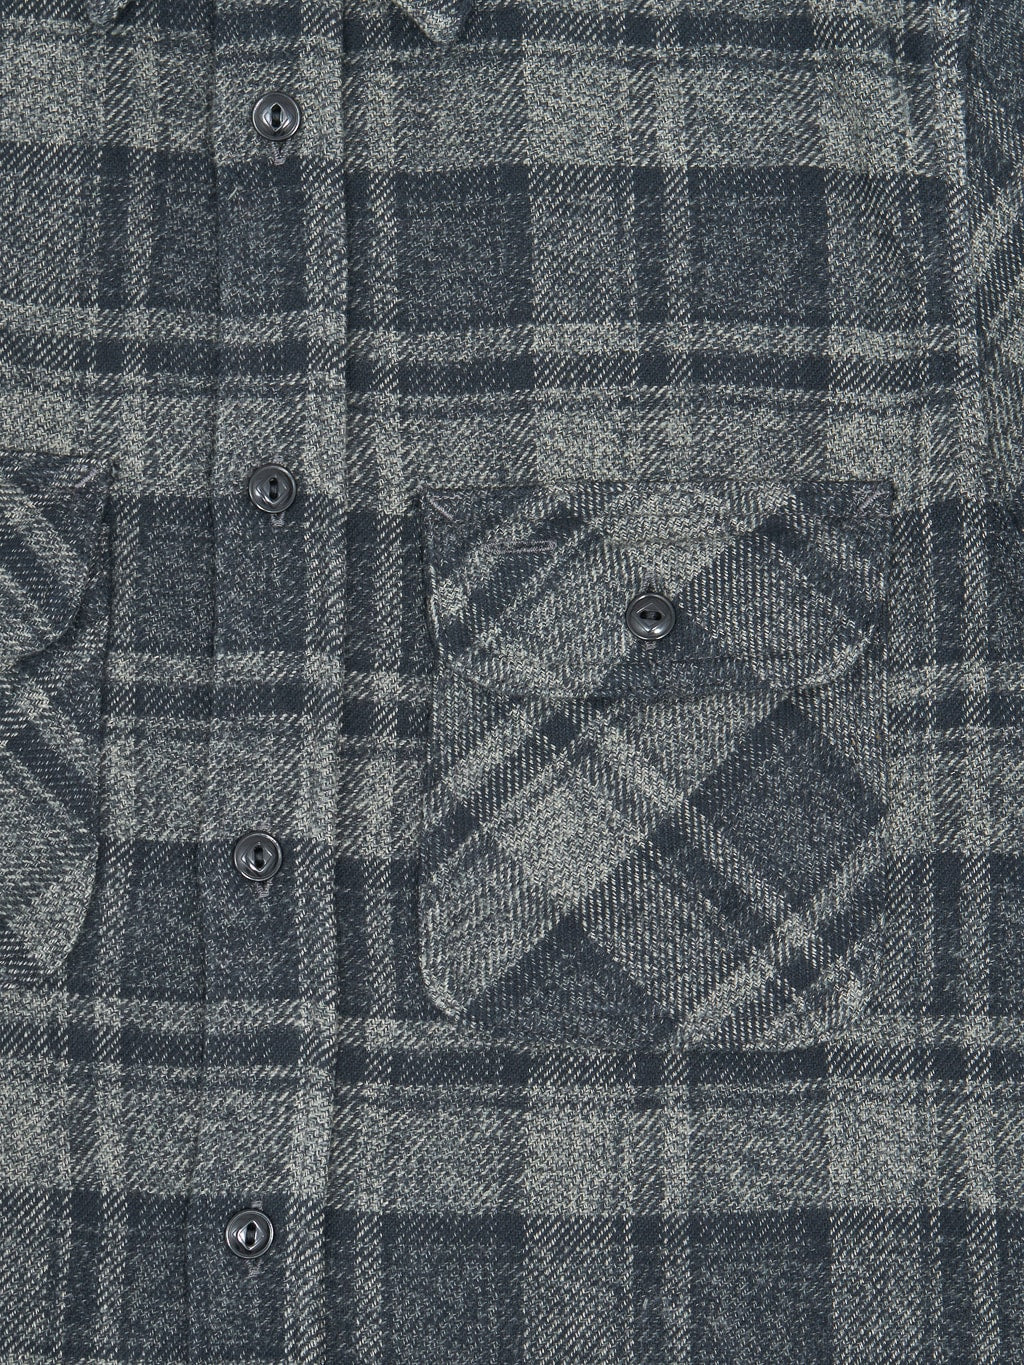 Fob Factory F3497 Nel Check Work flannel Shirt grey fabric